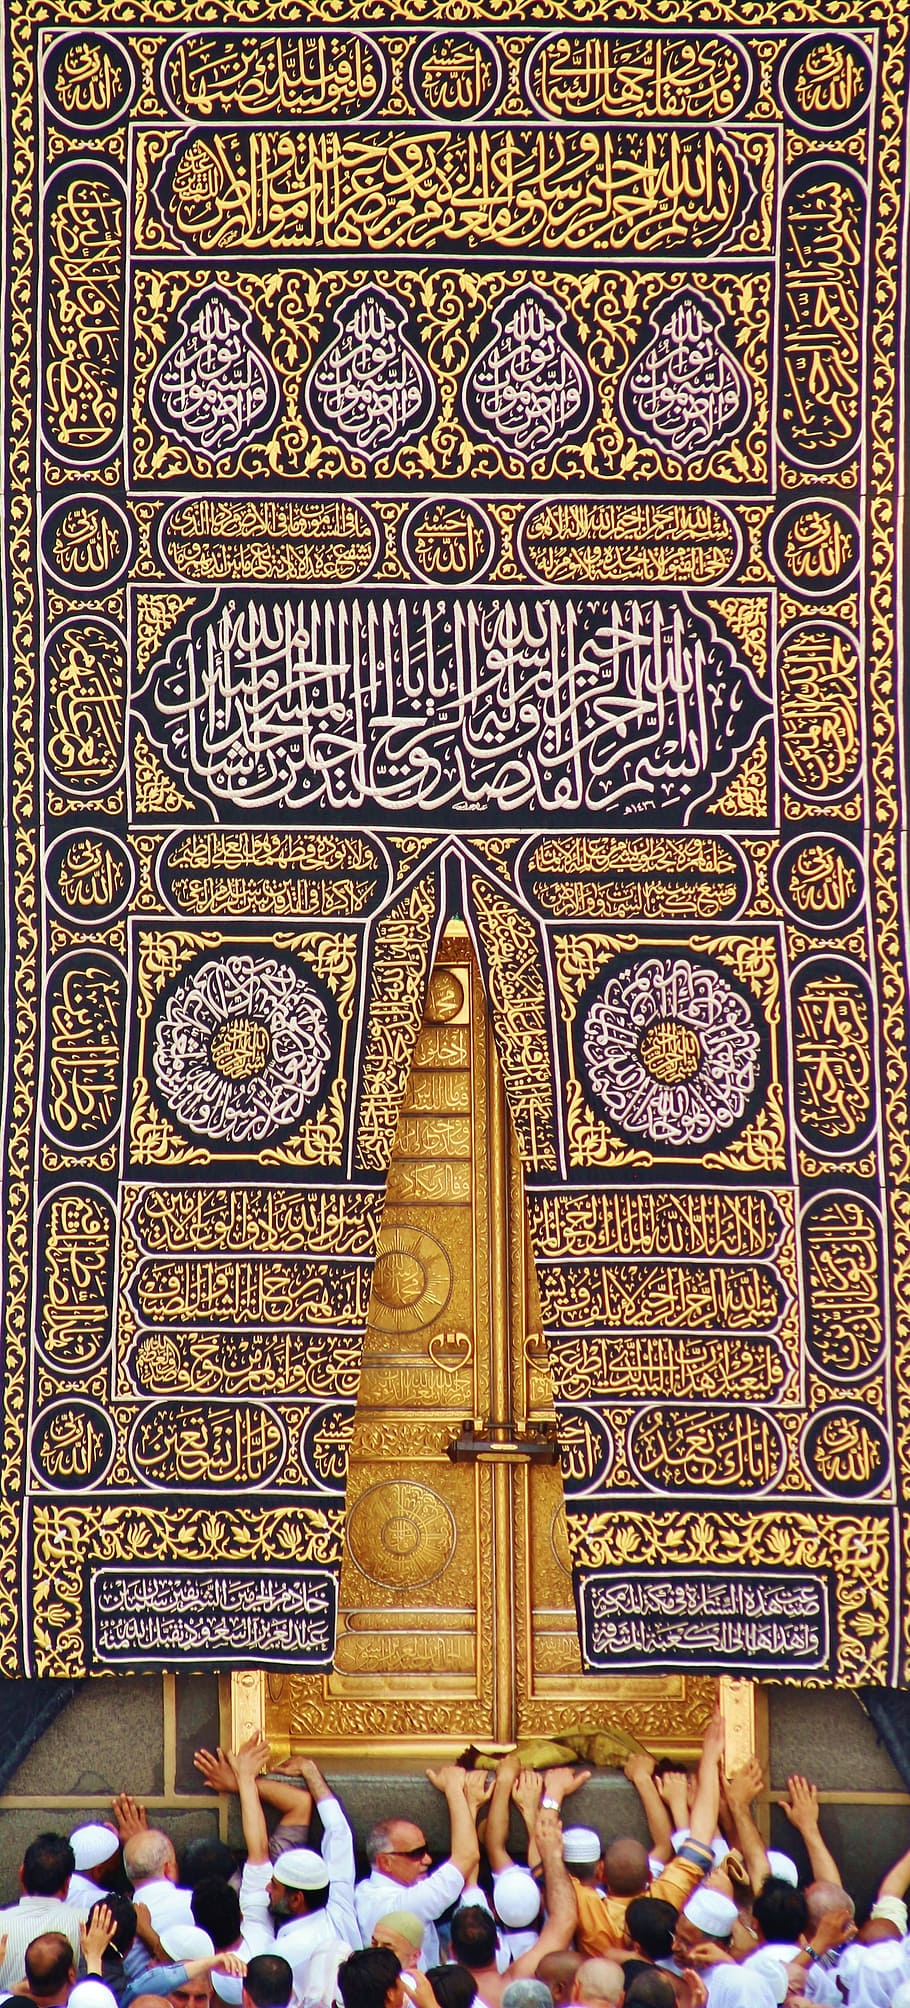 gold-colored decor, house of allah, mecca, mosque, muslim, kaaba, muhammad, saudi, quran, house